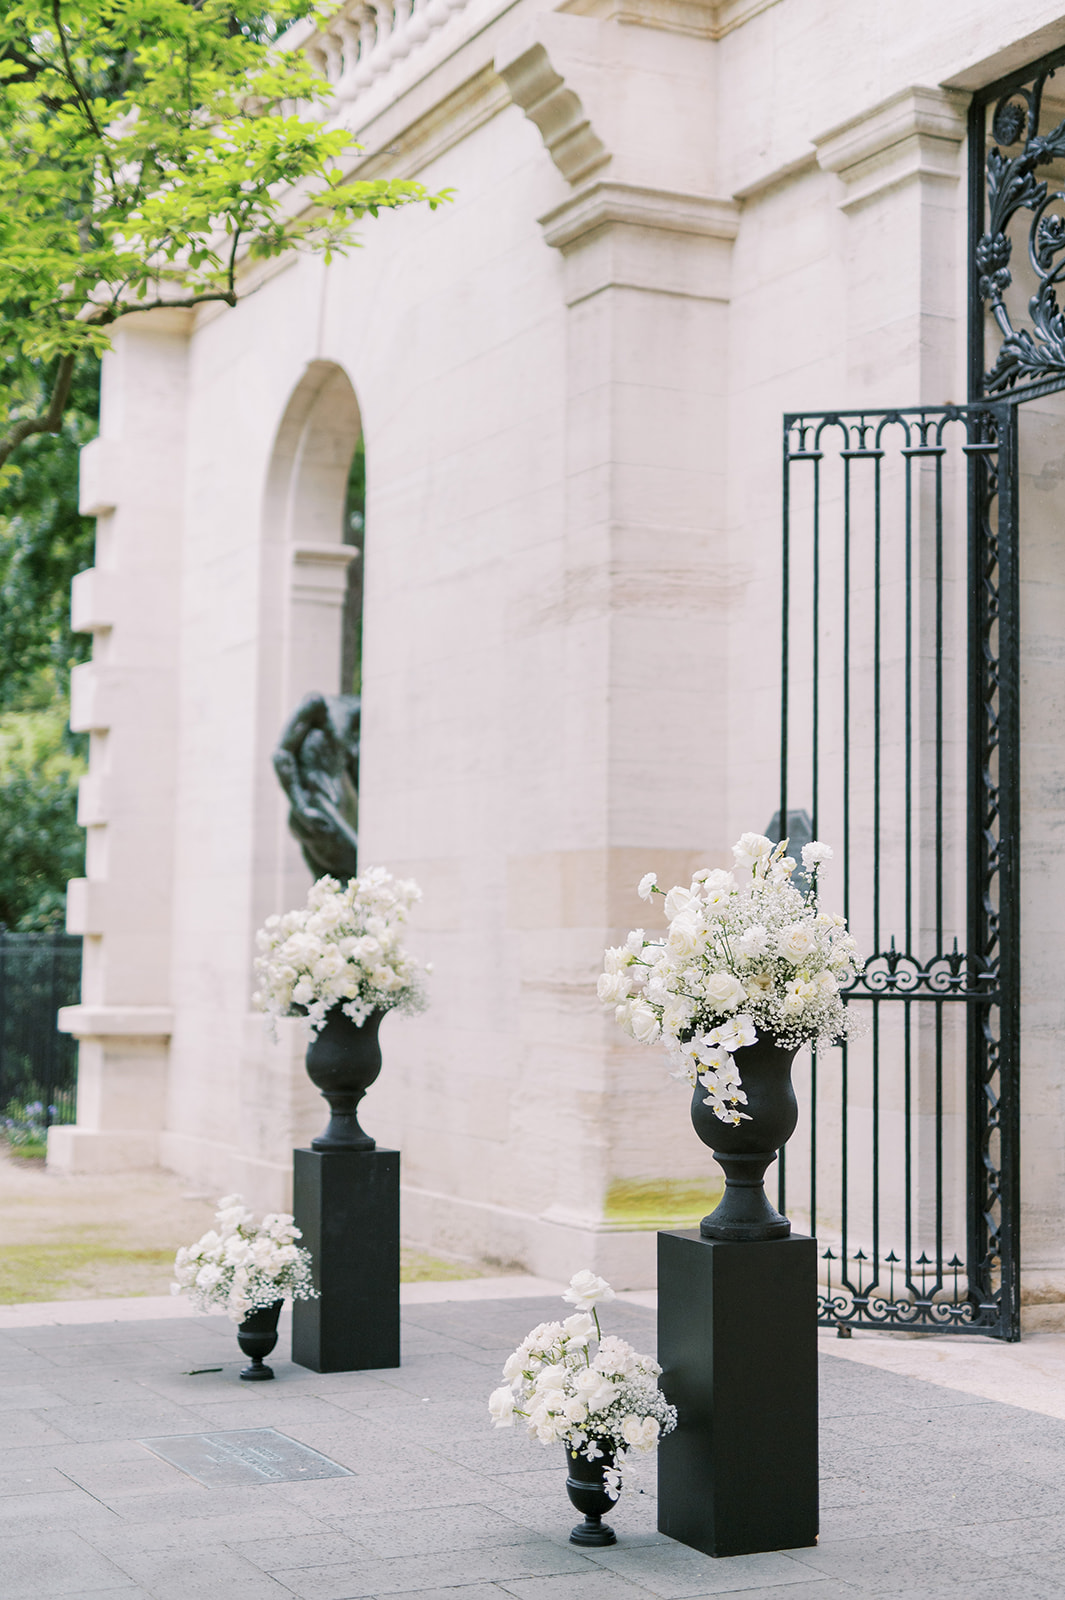 ceremony floral setup at Rodin Museum with black urns and pedestals and white florals